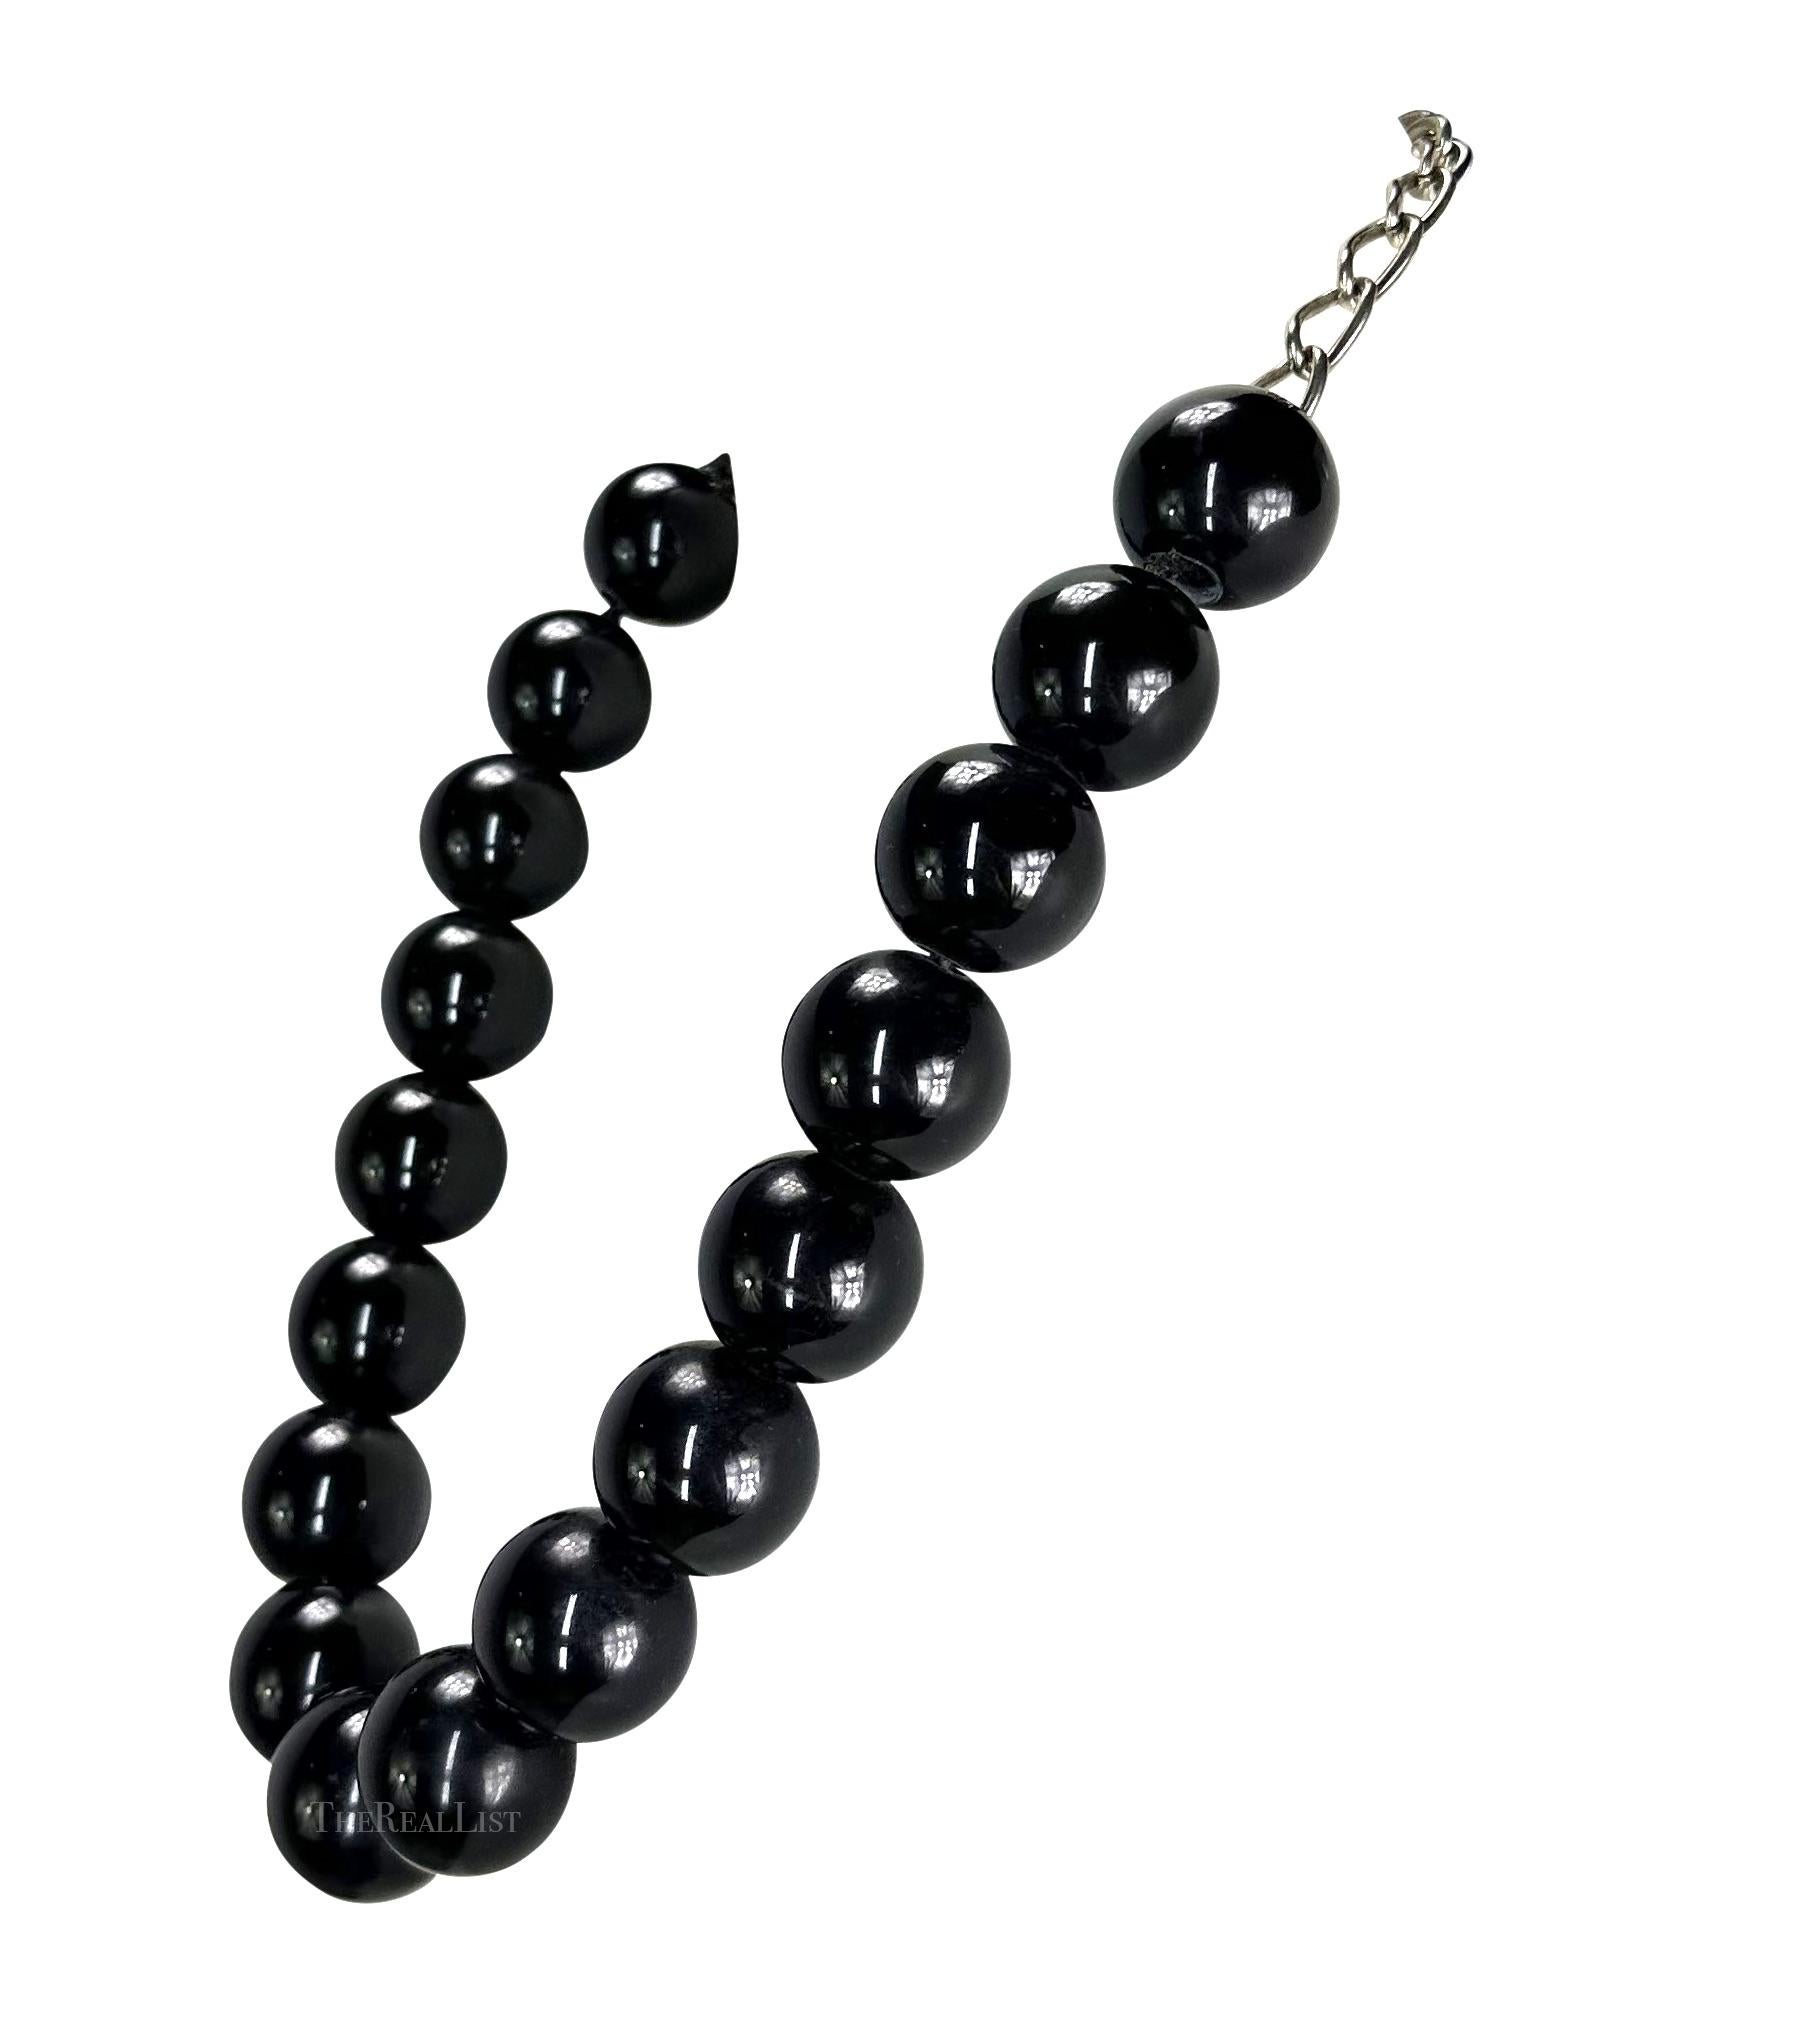 Presenting a beautiful black beaded Gianni Versace necklace, designed by Gianni Versace. From the late 1980s, this necklace features a strand of large black beads and is made complete with a silver-tone chain closure. From the early days of Gianni's